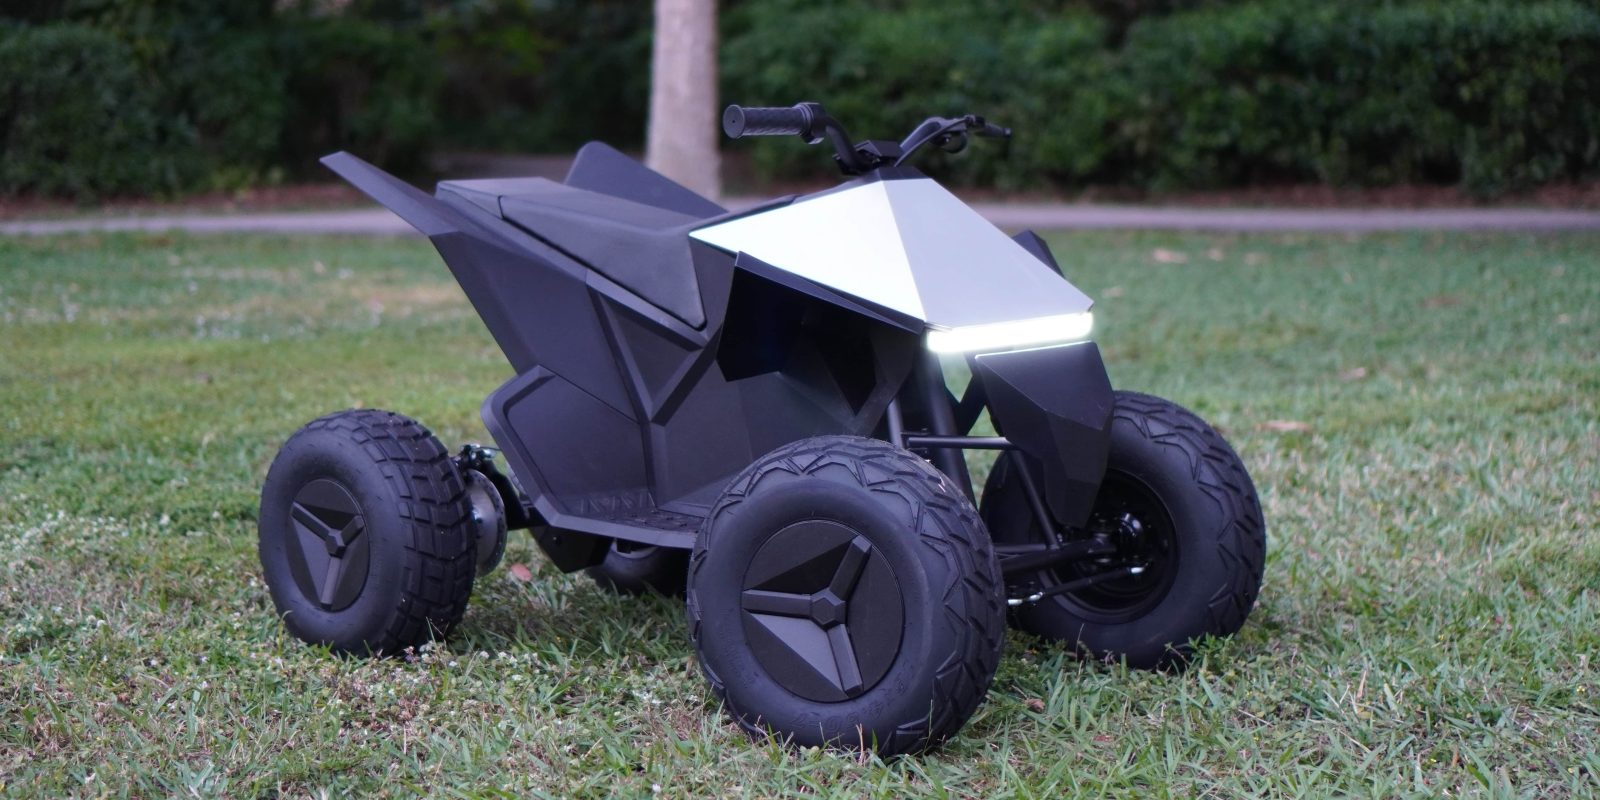 How Much Under Msrp Should I Pay For An Atv Unveiling The Ideal Price